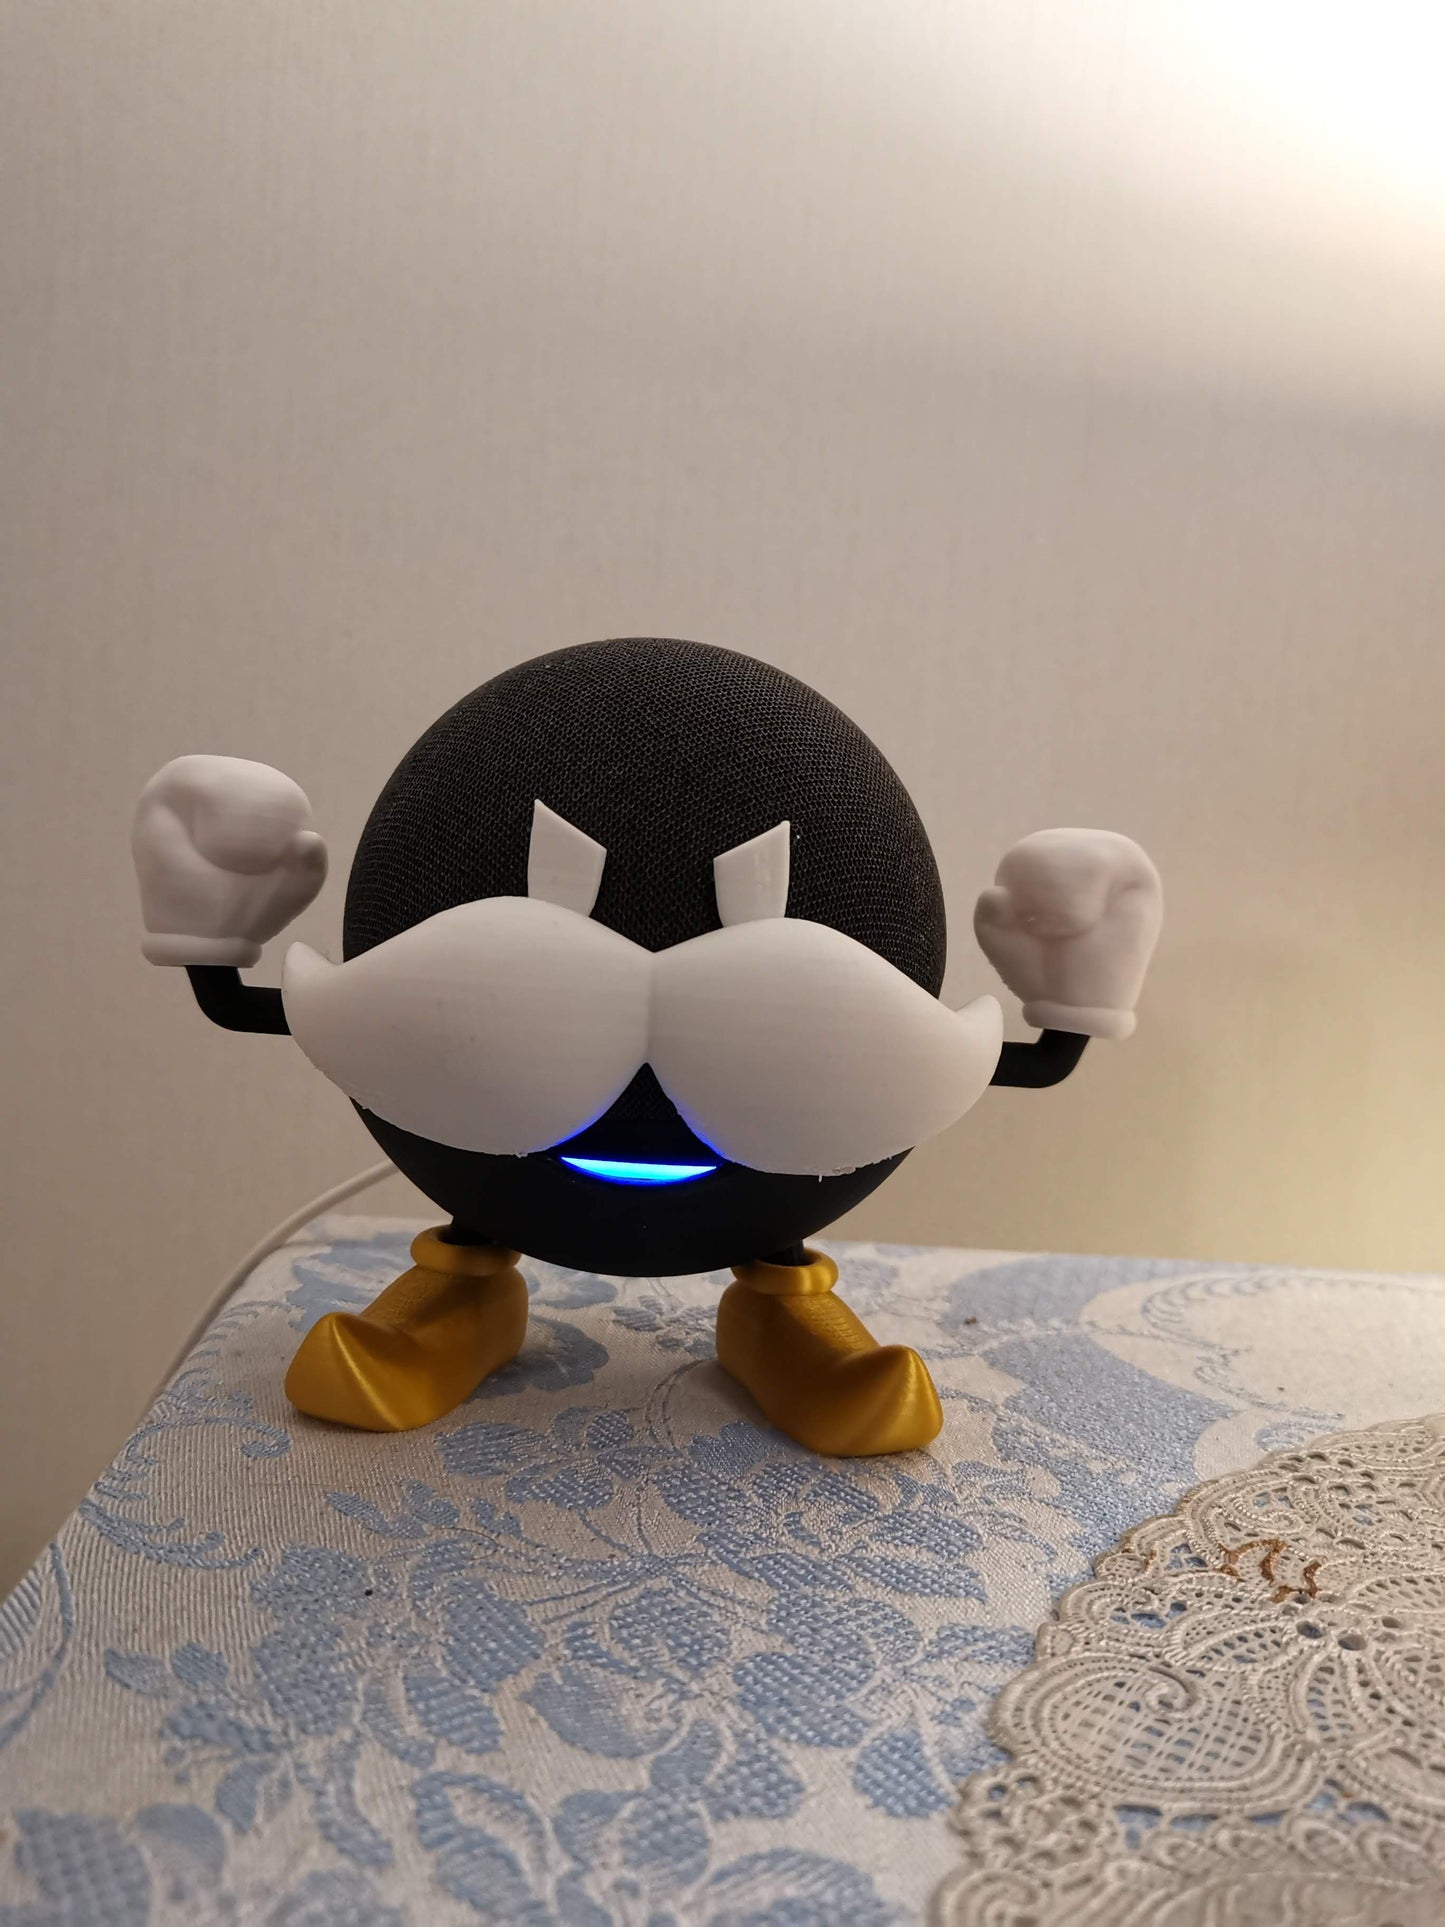 Bomb-omb Alexa Echo holder without crown close up